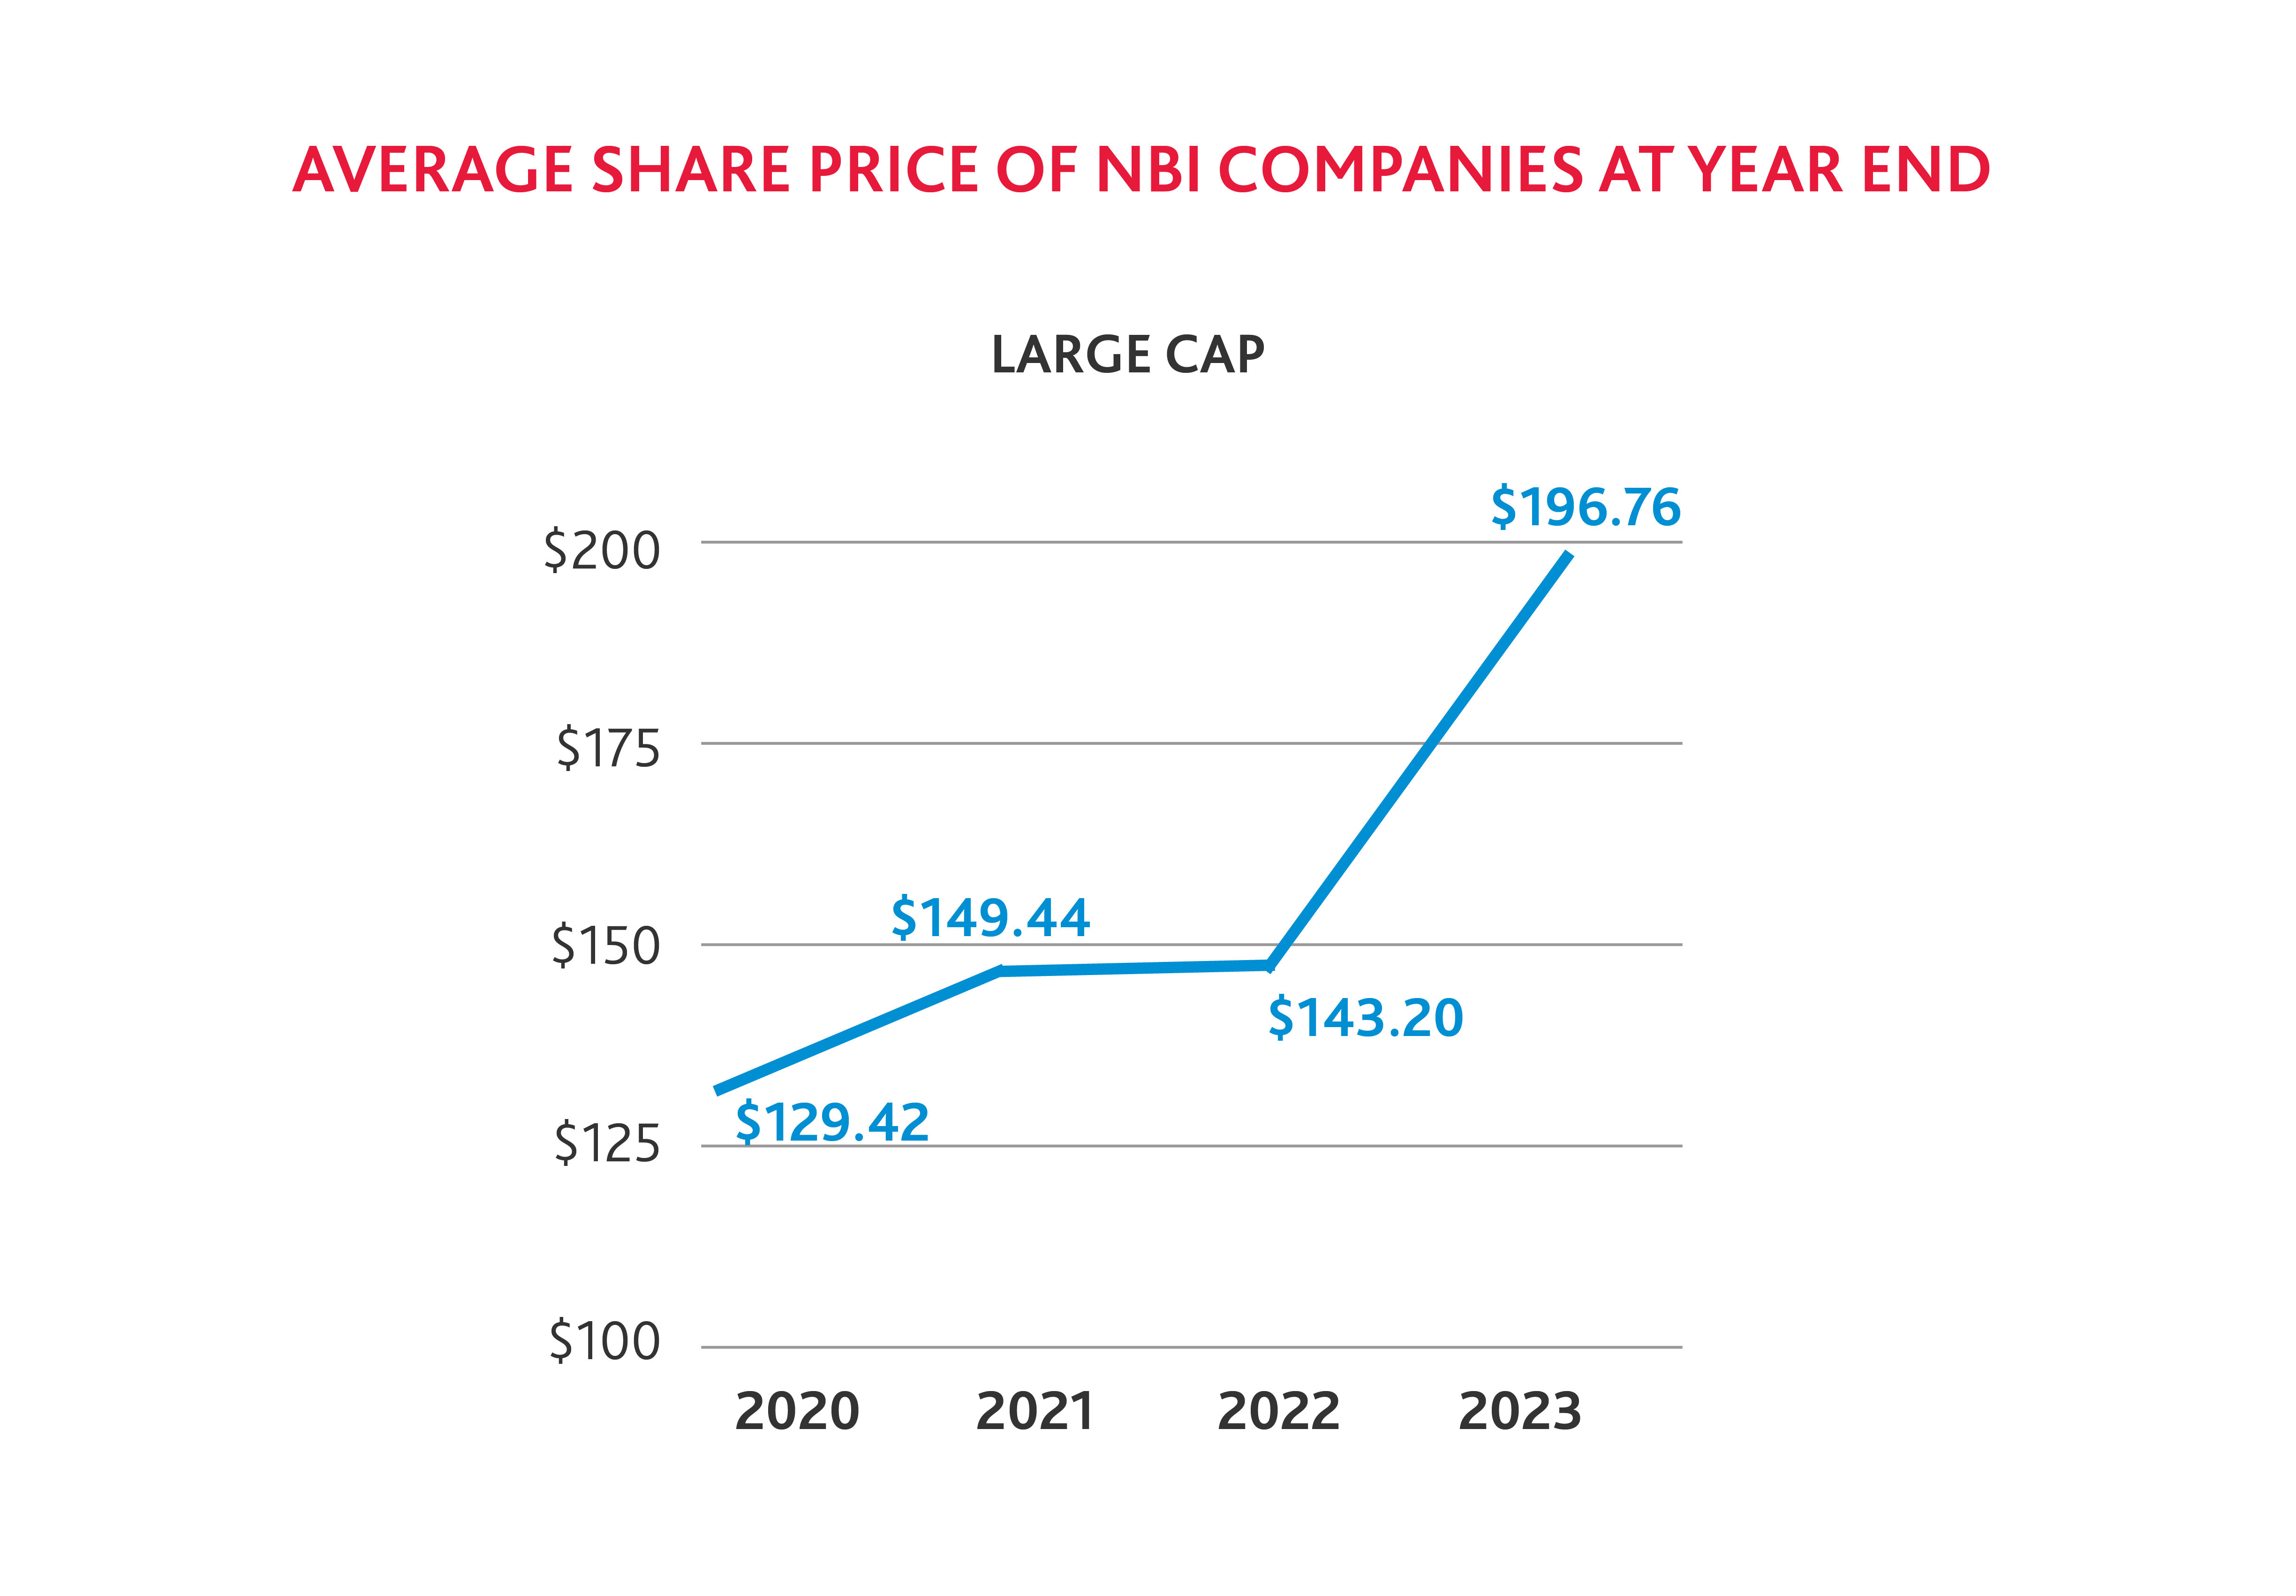 Chart showing average share price (large CAP) of NBI companies at year end from 2020 to 2023